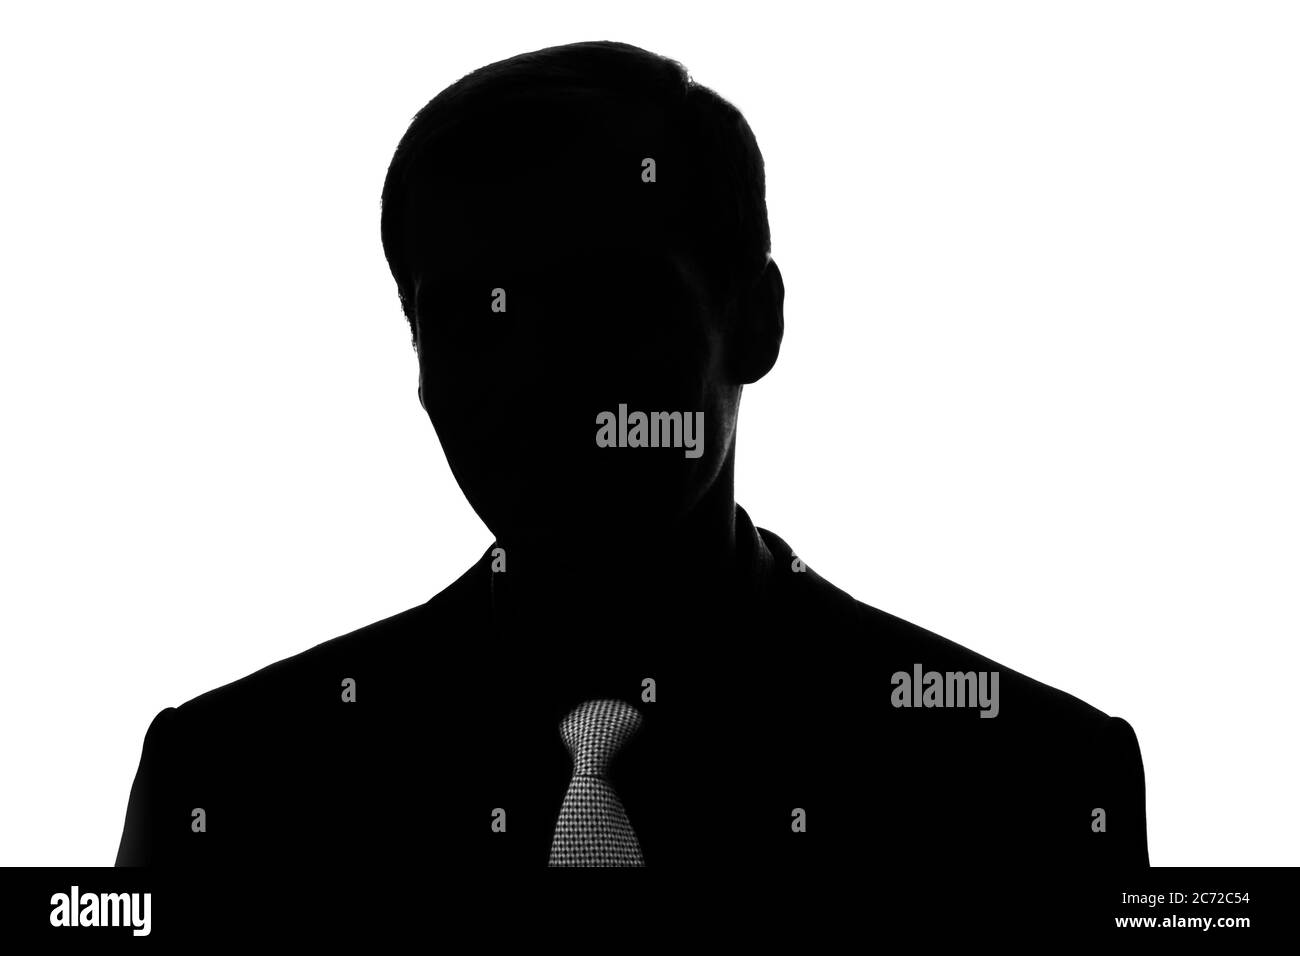 Portrait young man in suit, tie in front view - silhouette Stock Photo